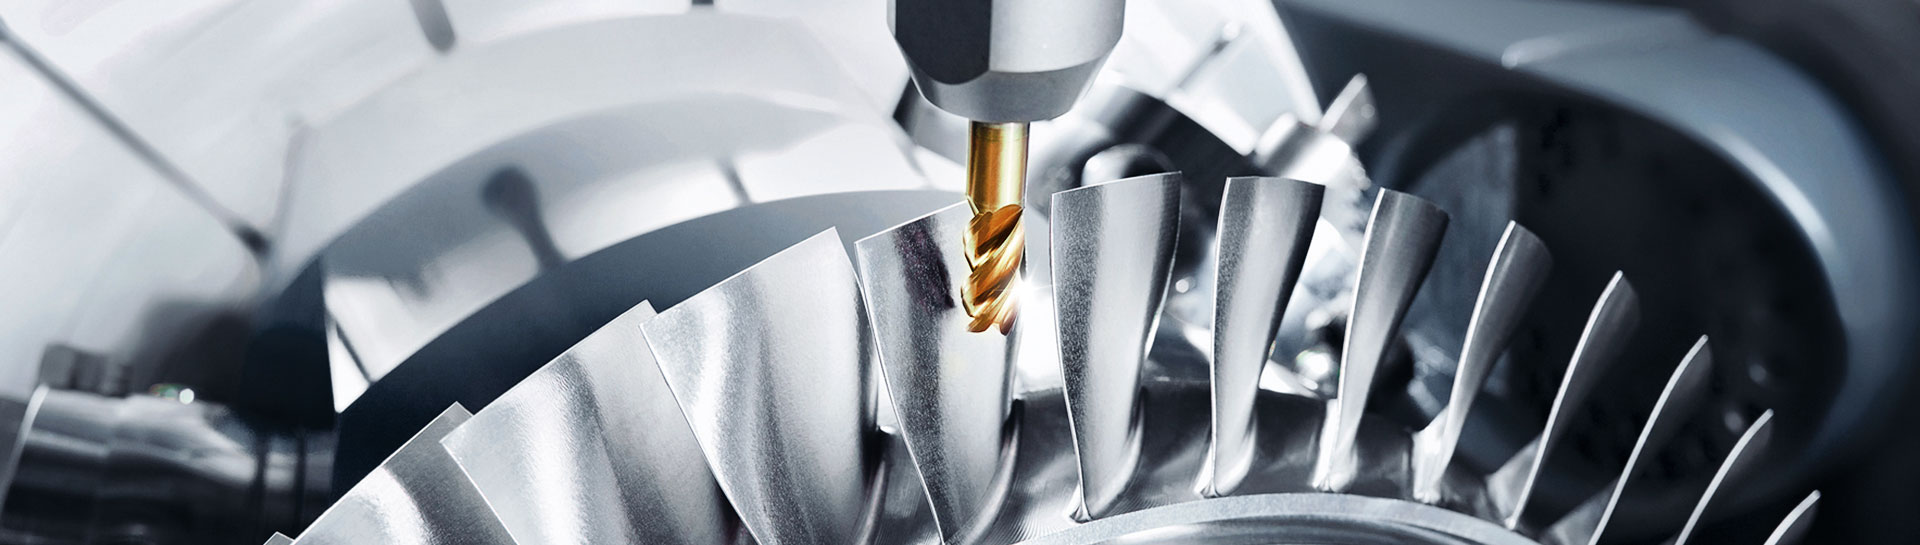 High Precision Carbide Tools, Milling Cutters, Carbide Drills - Millcraft